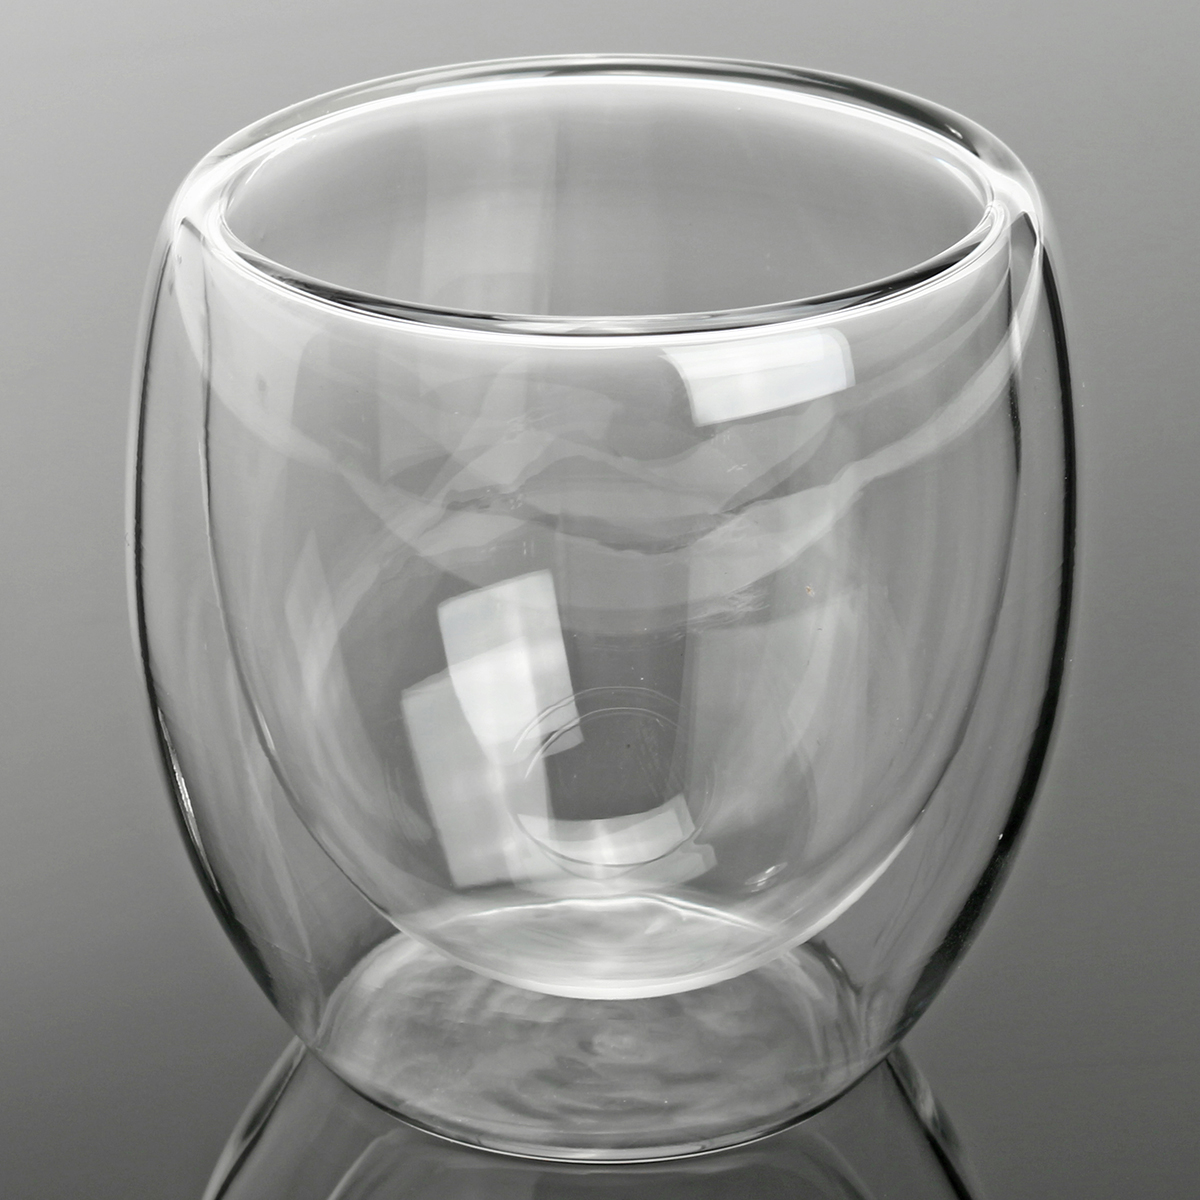 80ml-Clear-Glass-Double-Wall-Mug-Cup-Insulated-Thermal-Office-Tea-Drinking-Tea-Container-1454945-4